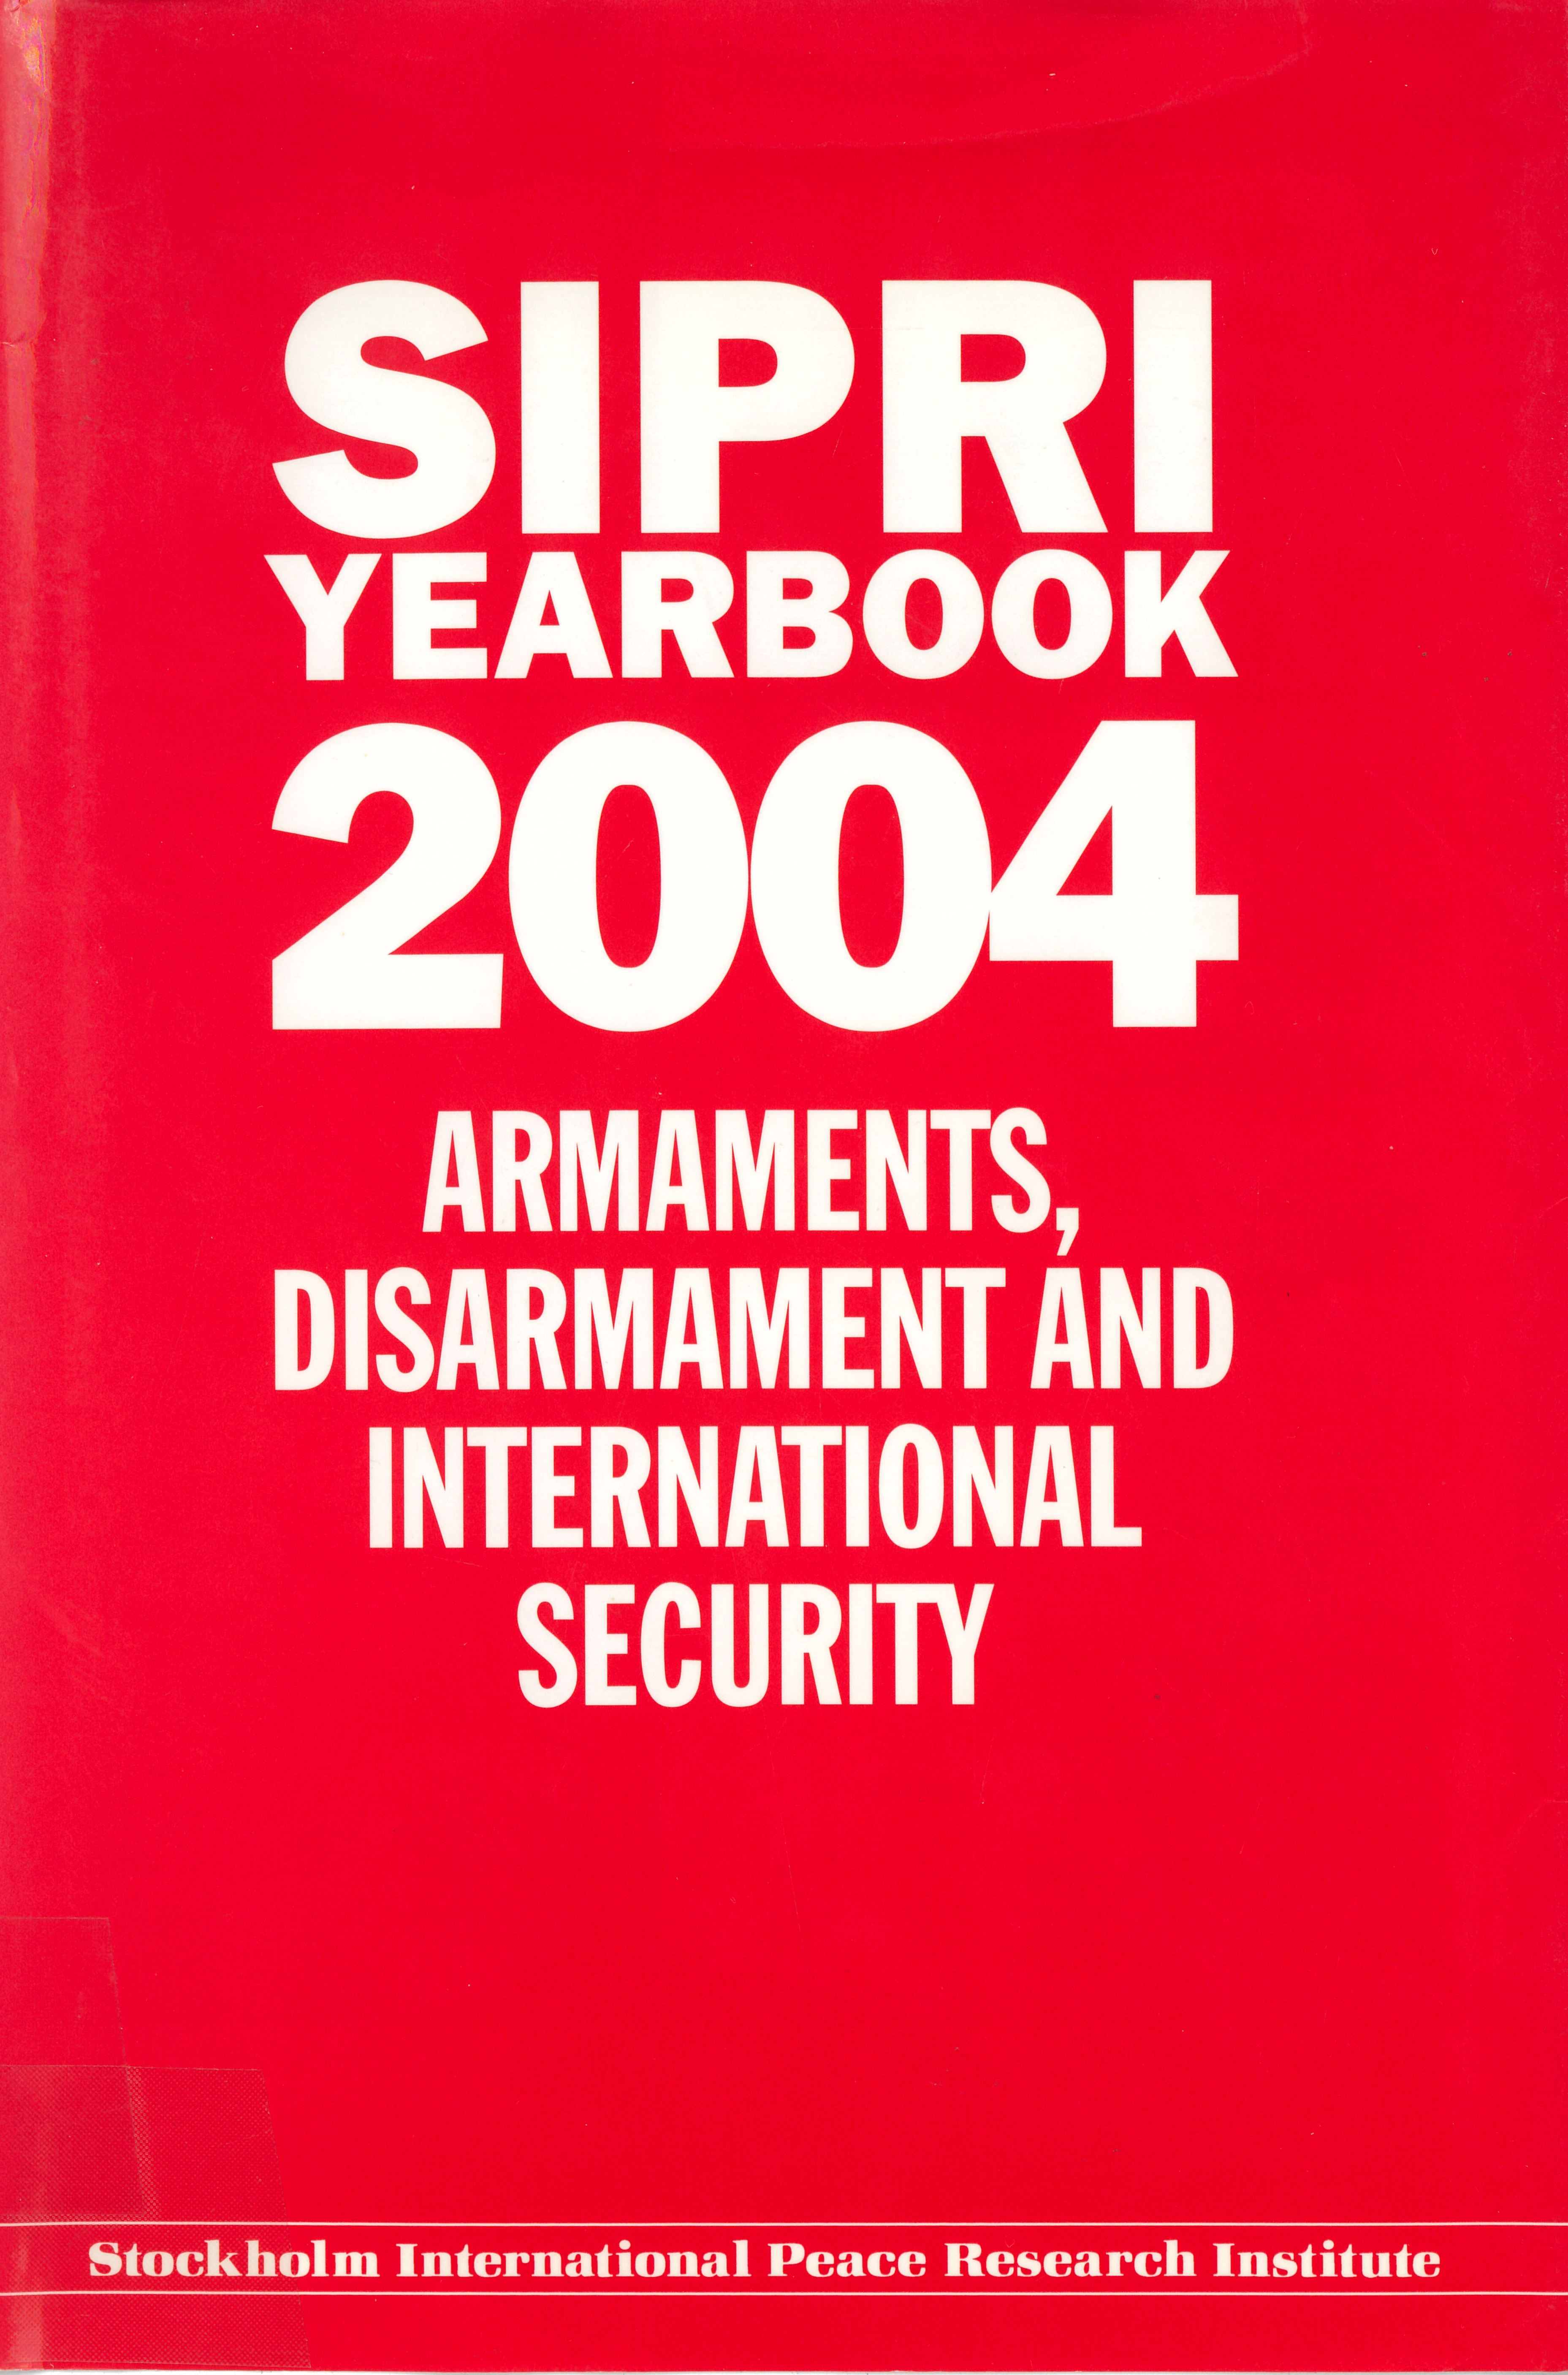 SIPRI yearbook 2004 cover